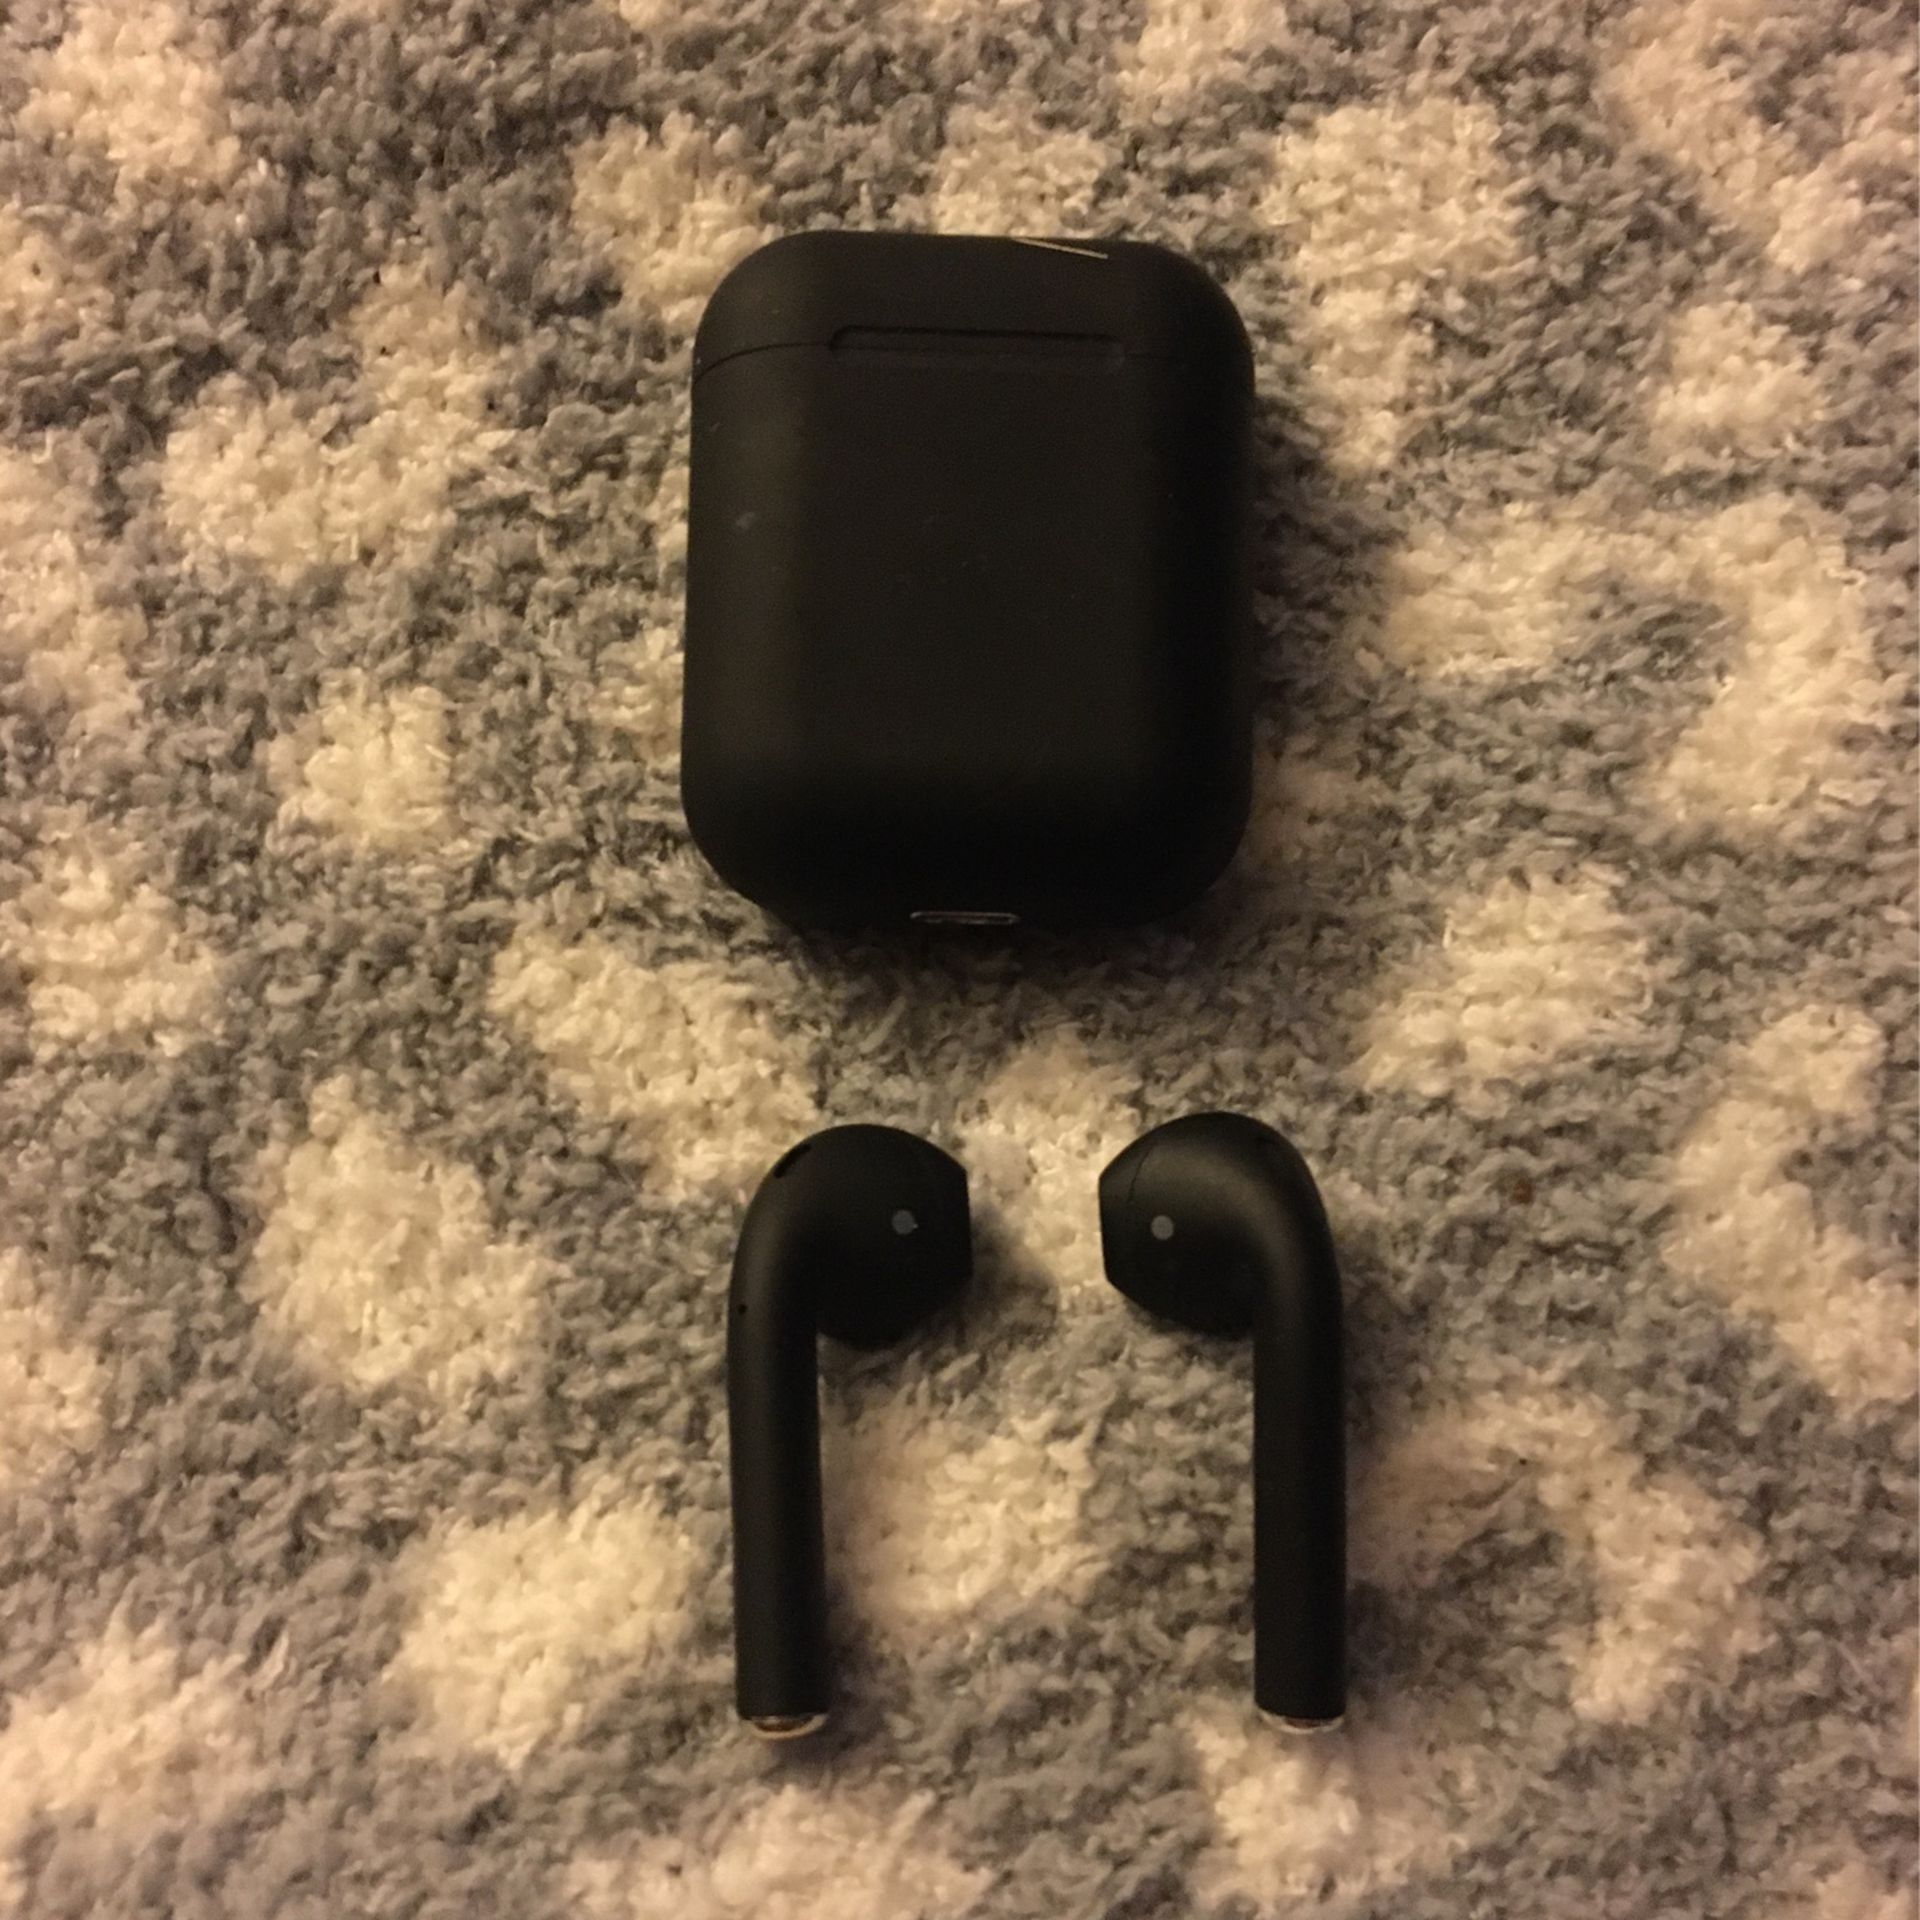 Wireless EarPods Brand New Never Used With Carrier